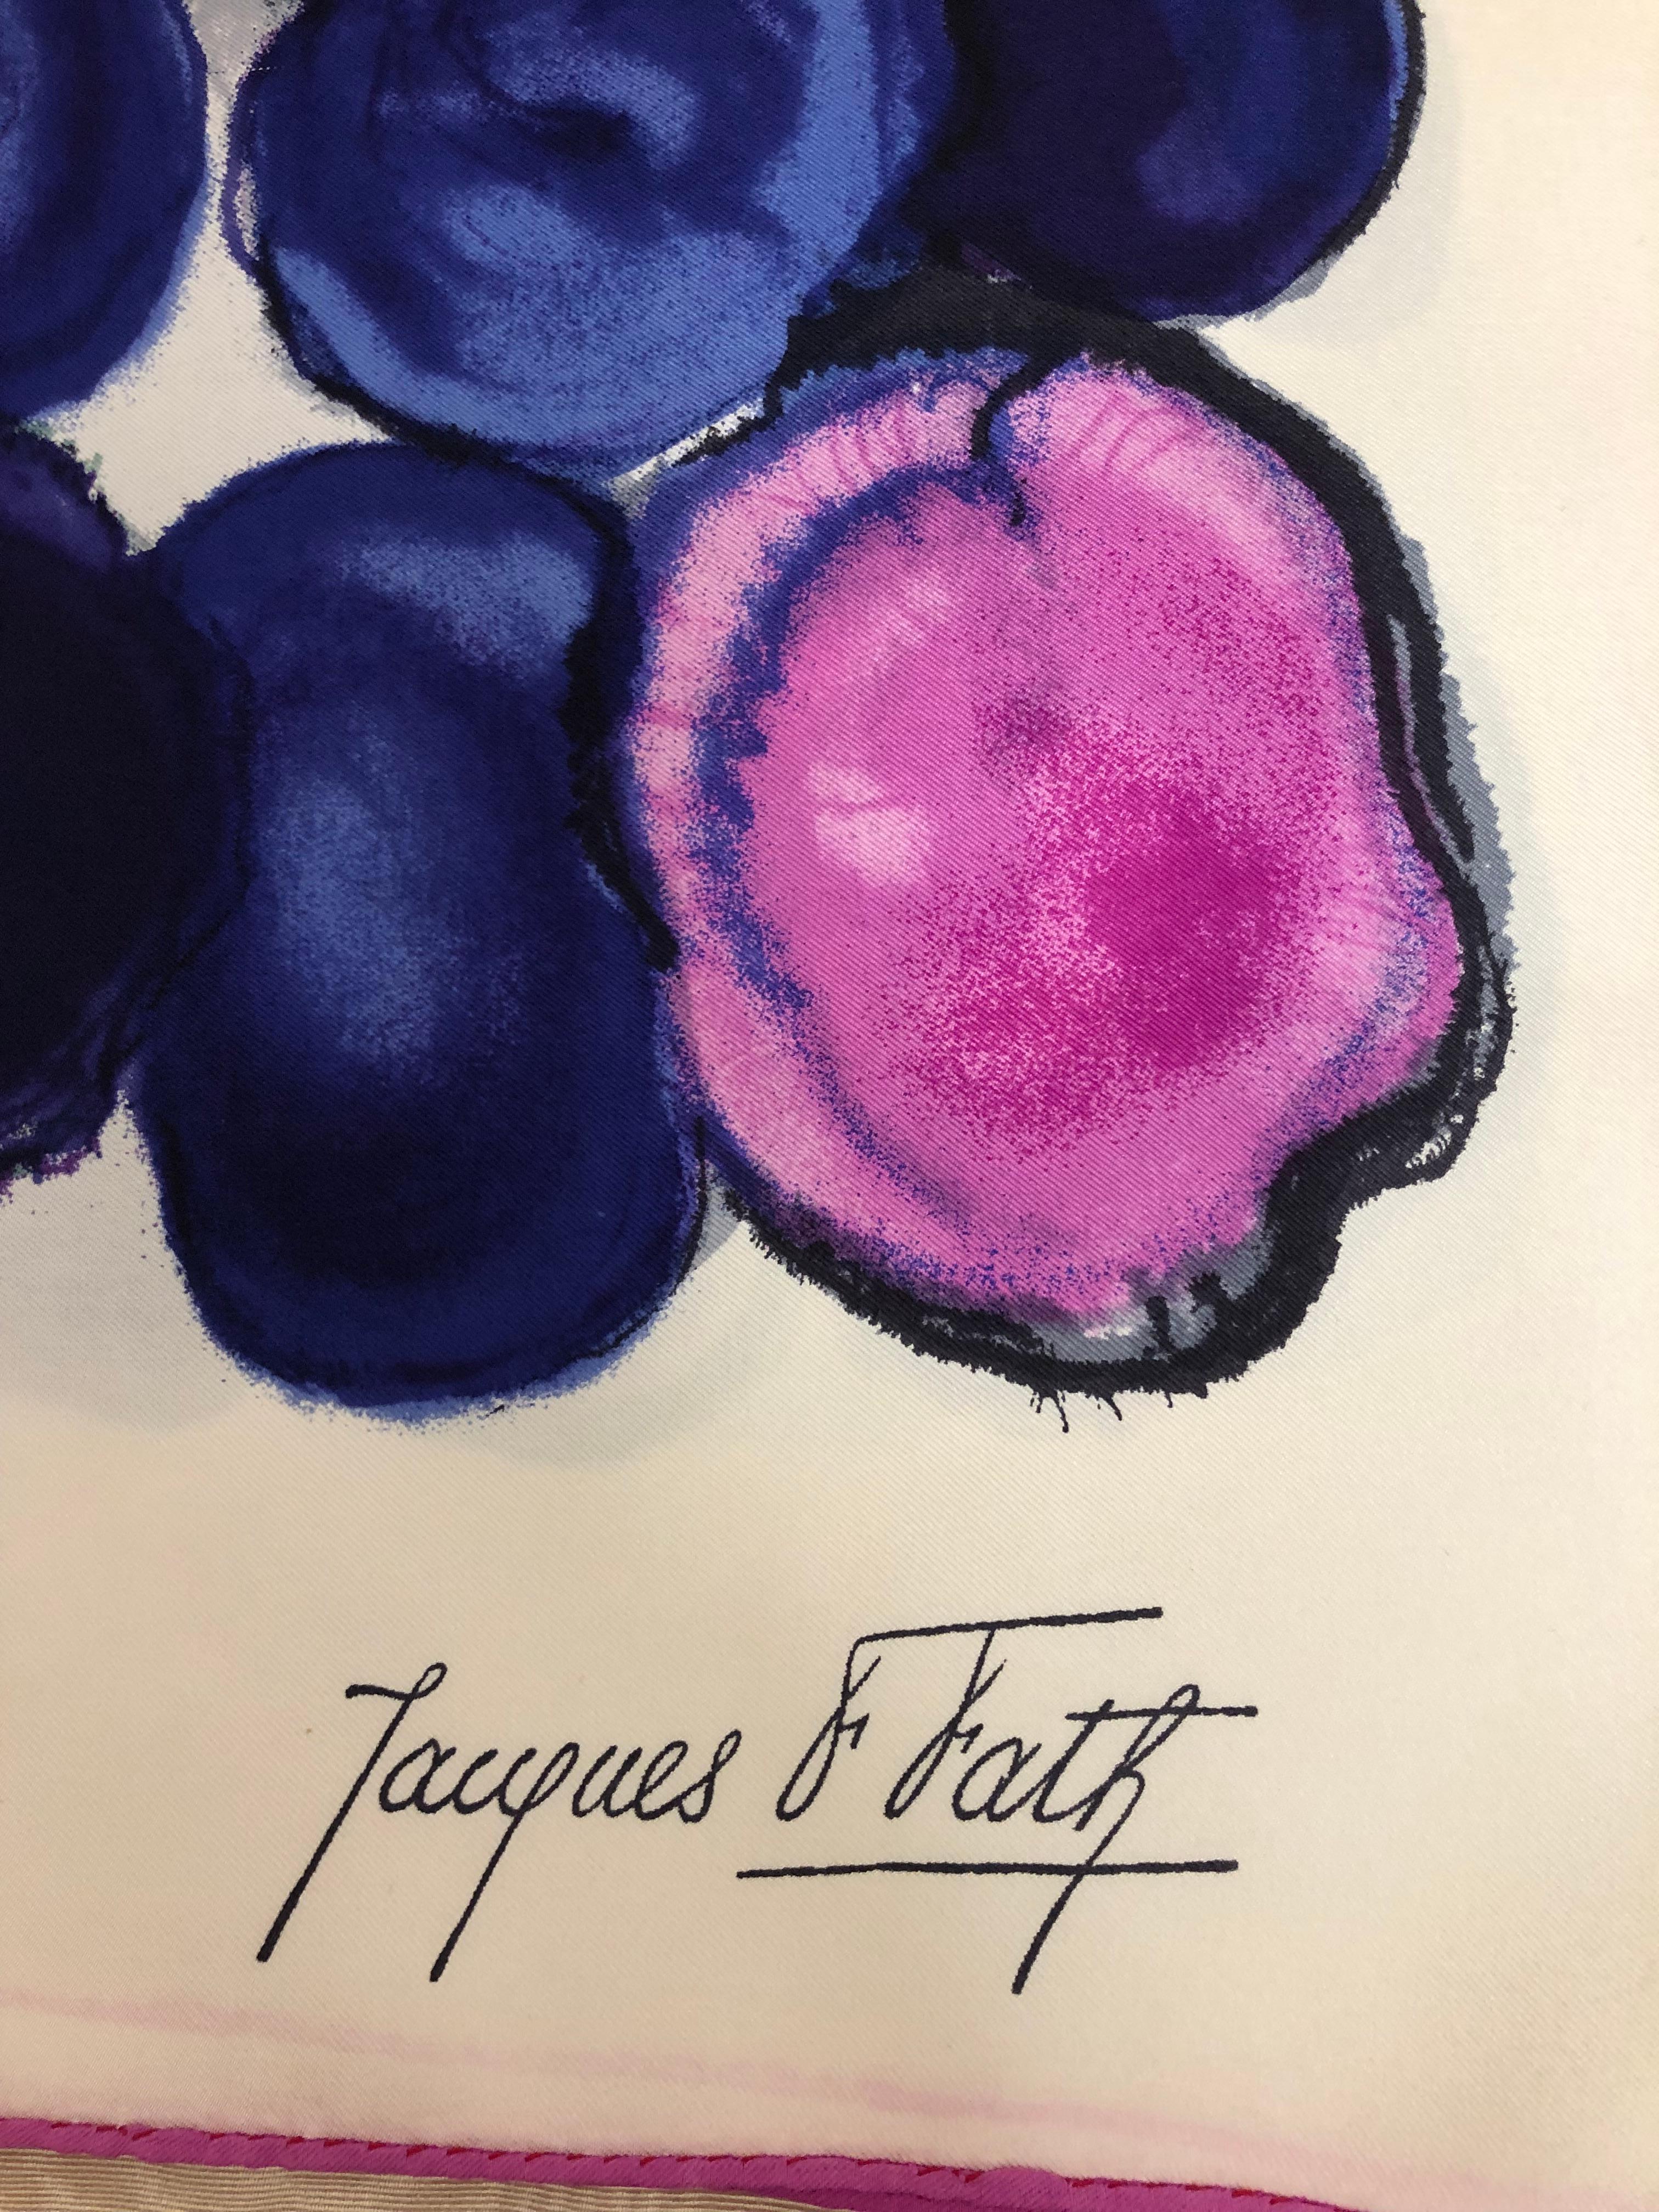 Beautifully vibrant scarf which looks hand painted. Hues of predominantly blues, pinks and purples with splashes of green, this silk scarf with hand rolled hems would look equally good hanging on your wall.

It is signed Jacques F Fath and still has